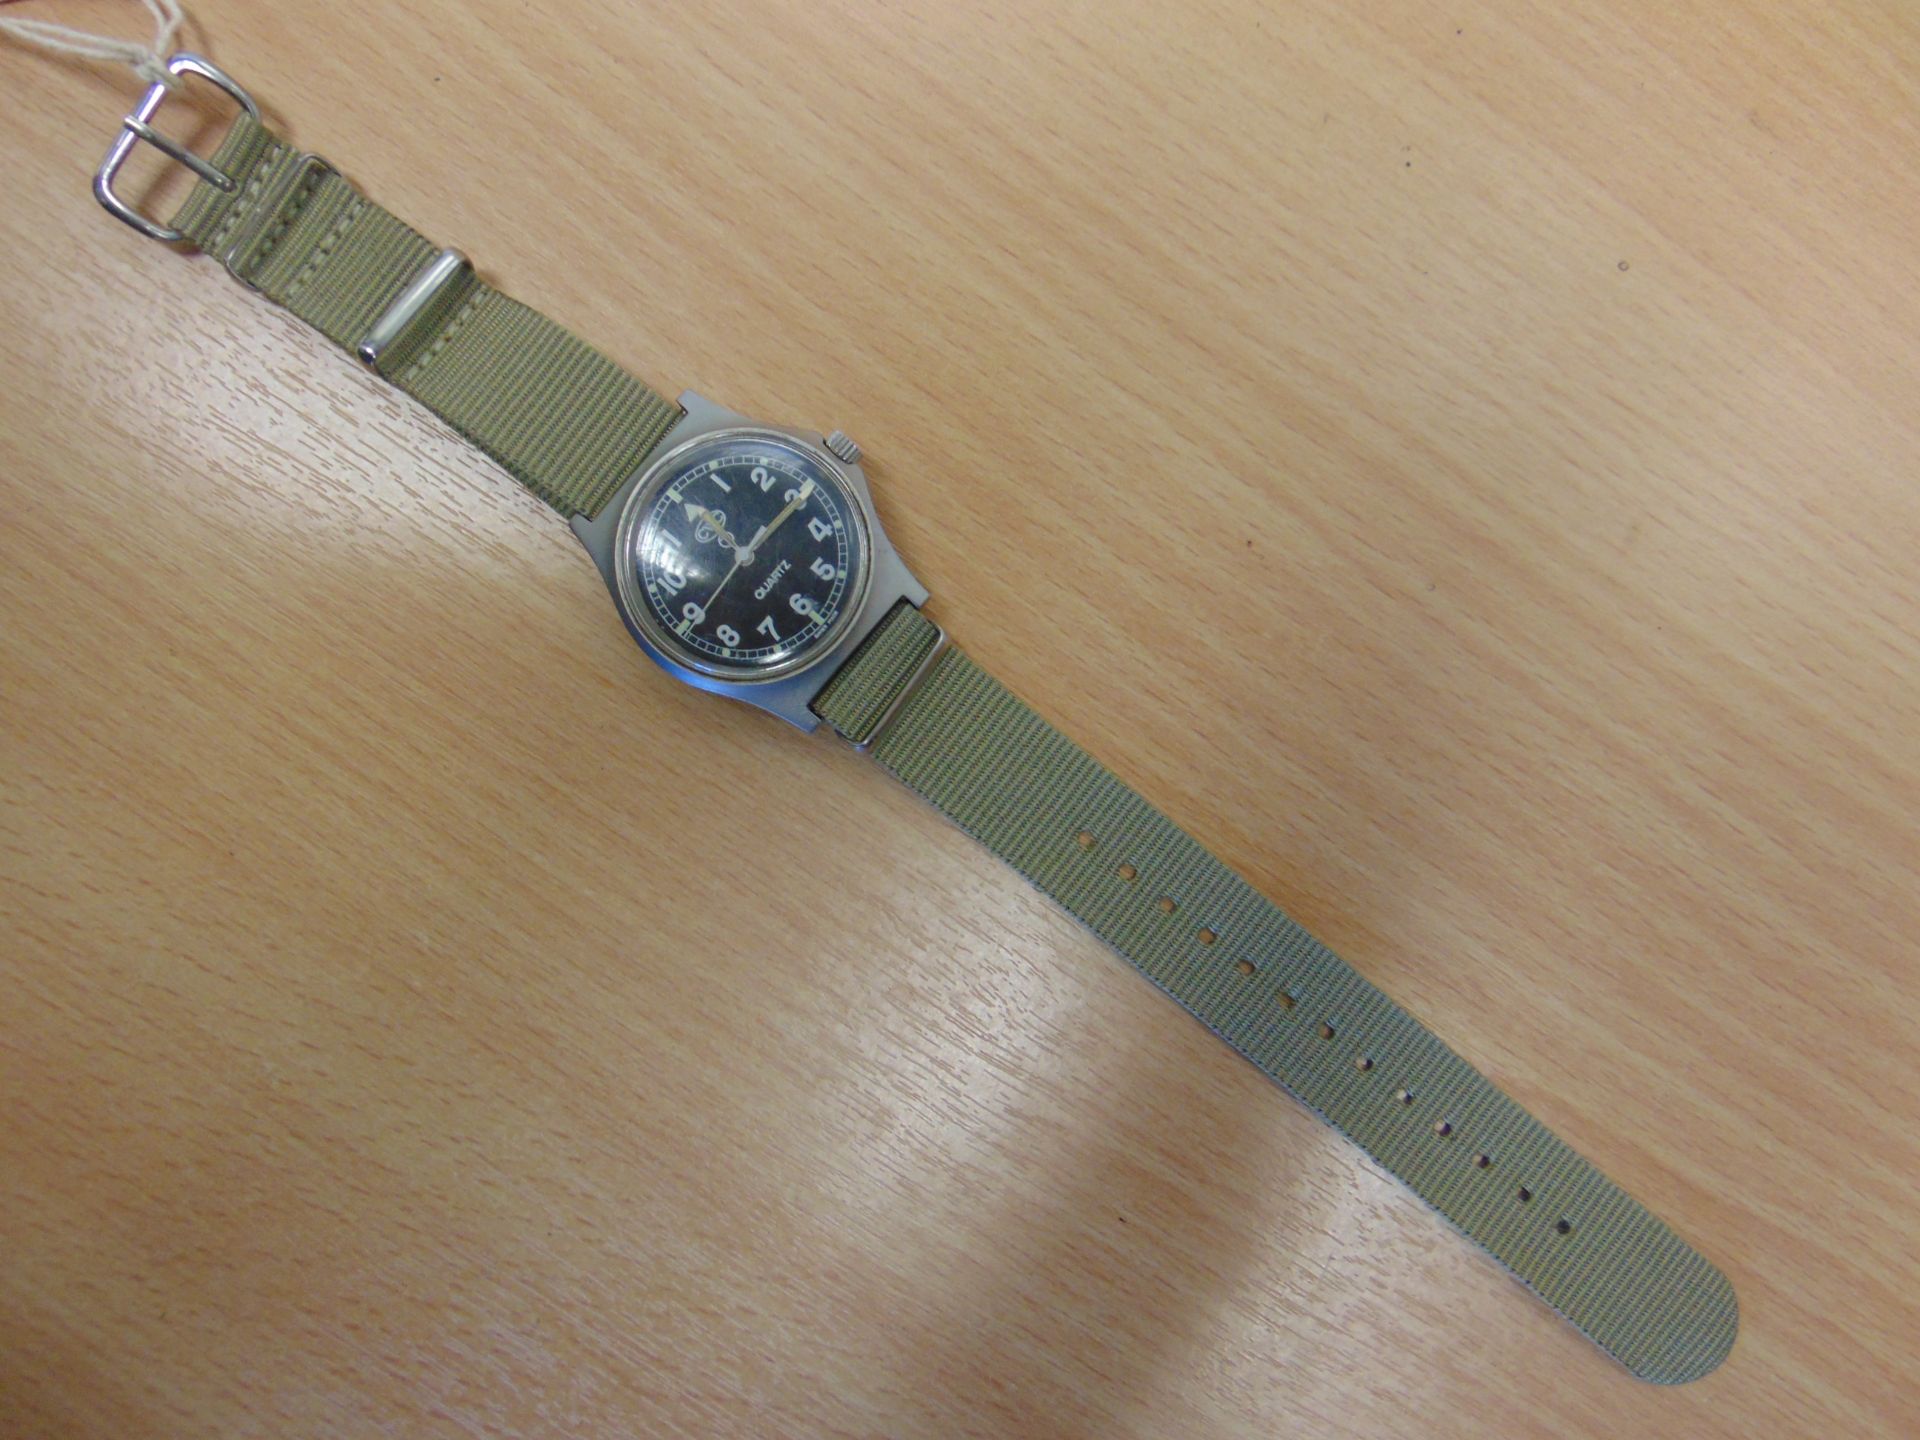 CWC QUARTZ 0552 ROYAL MARINES/ ROYAL NAVY ISSUE SERVICE WATCH NATO MARKED- 1989 - Image 6 of 7